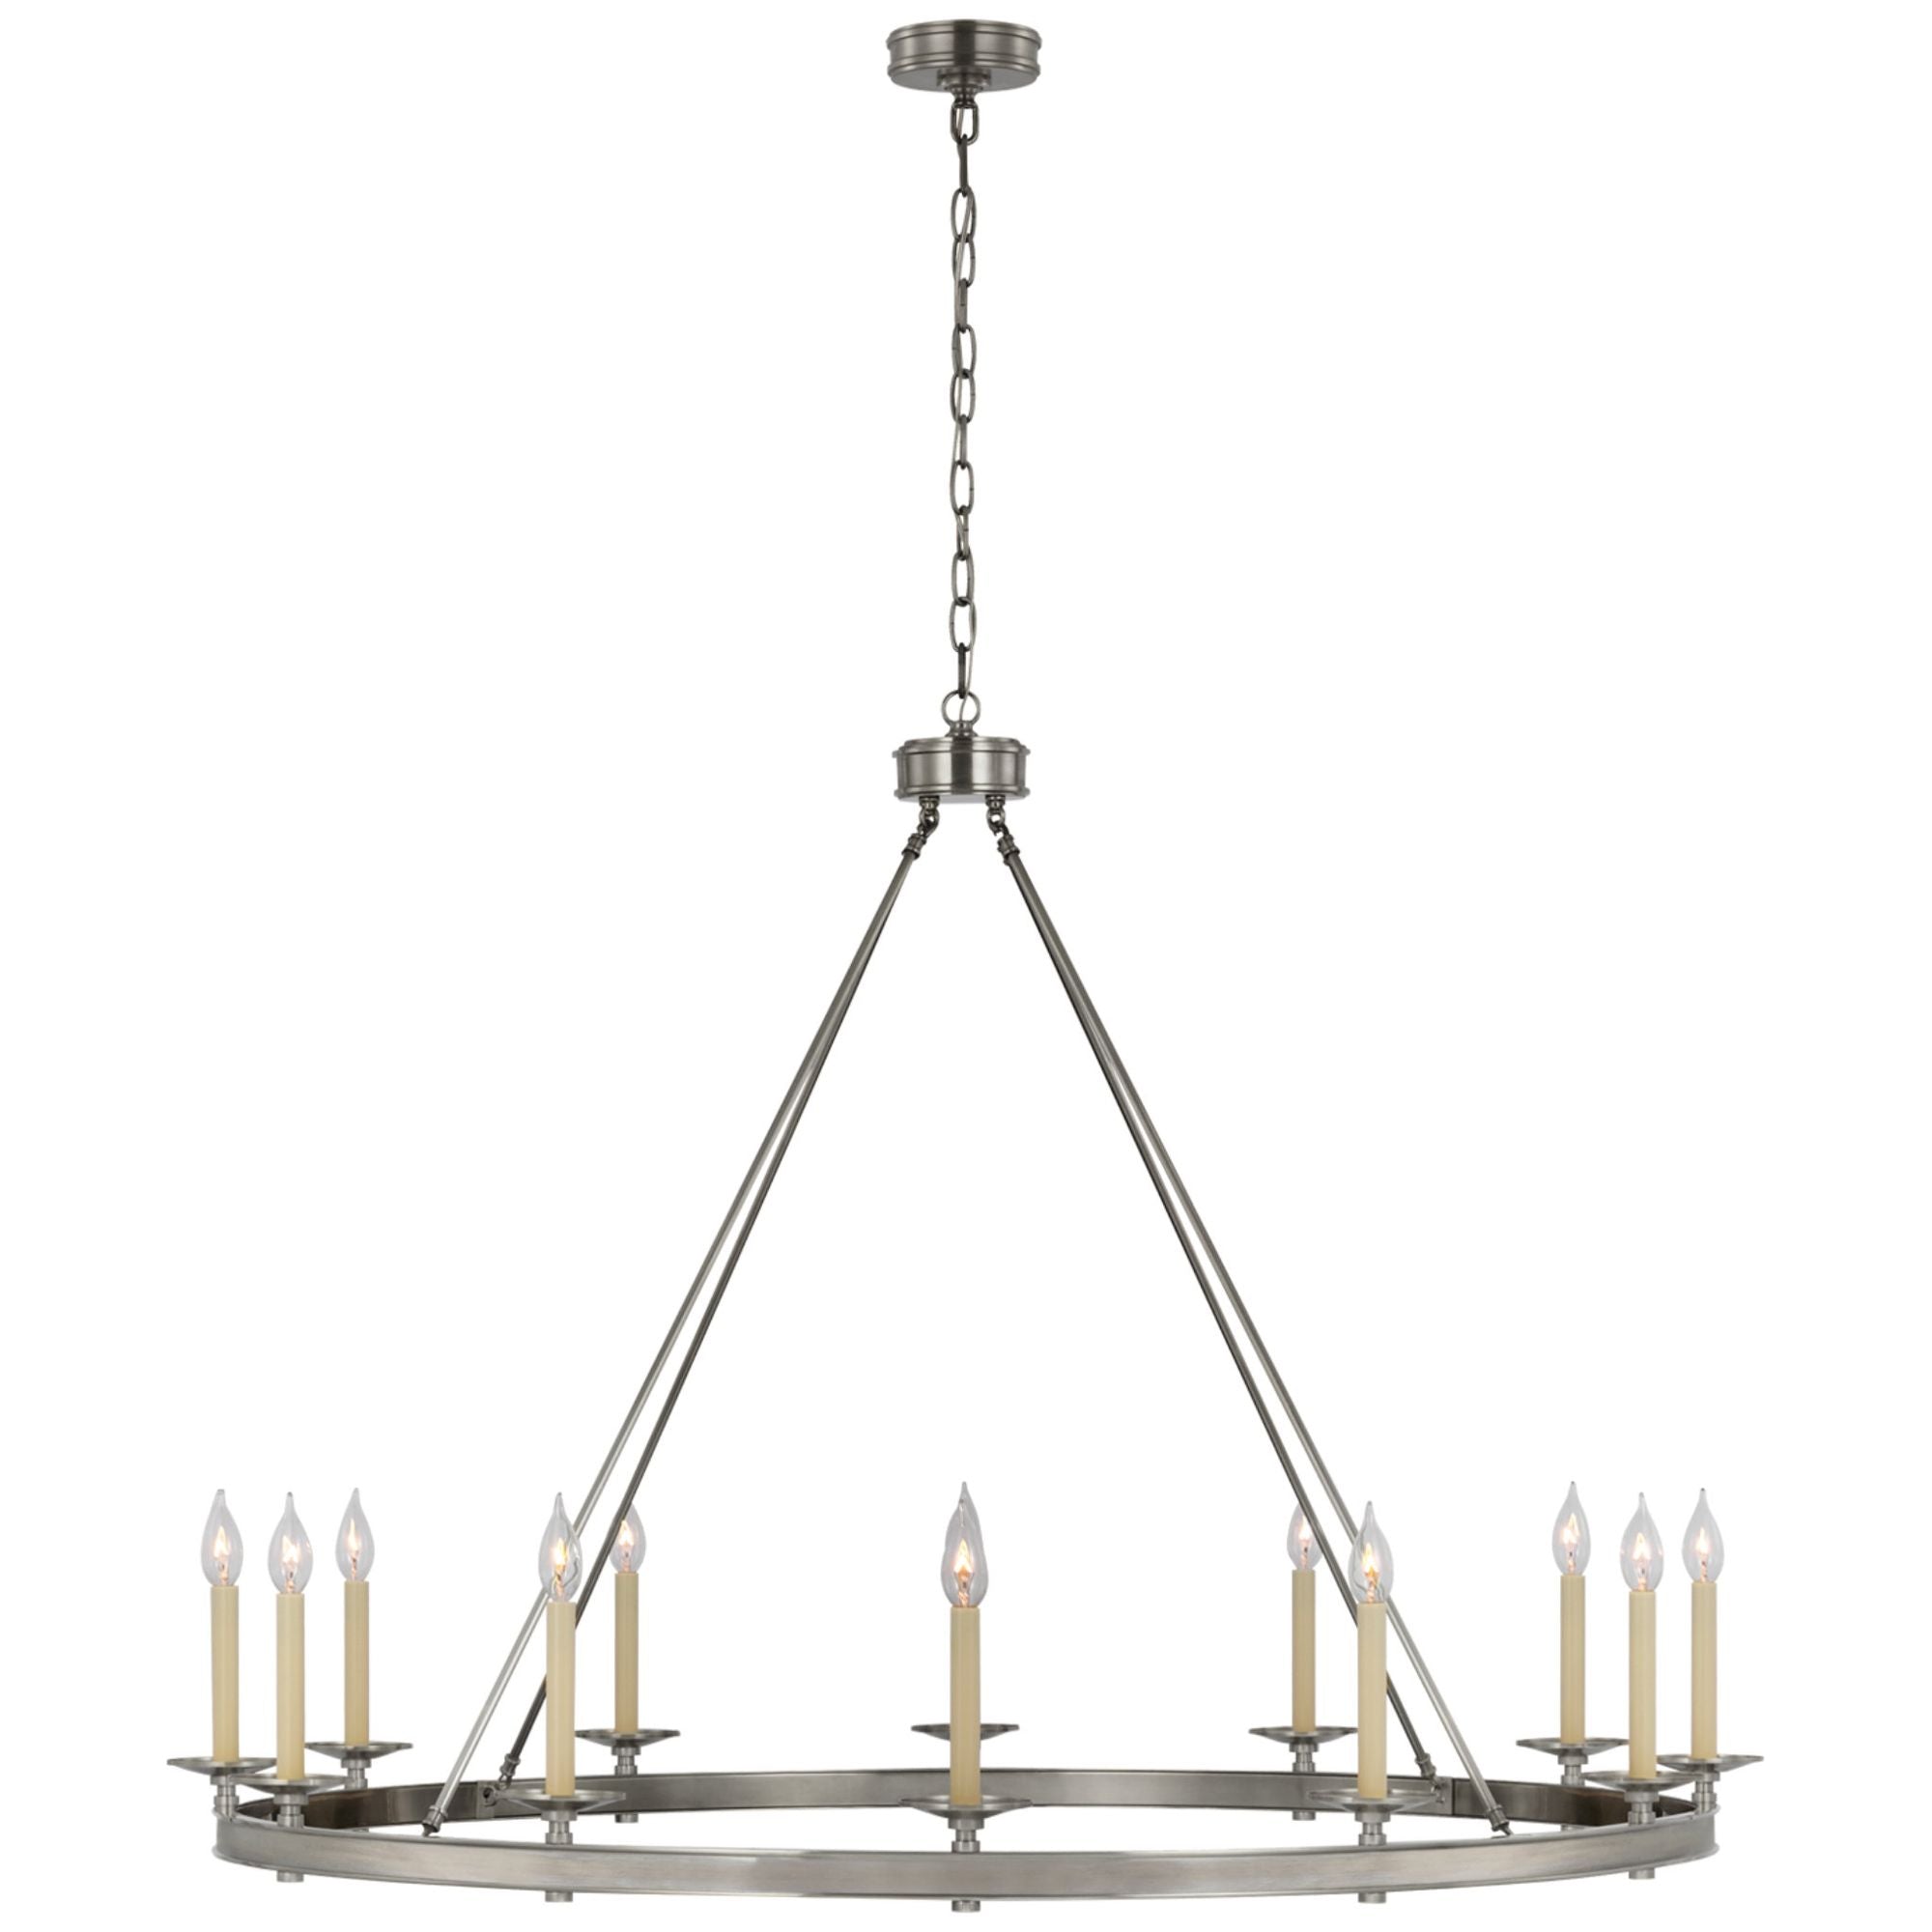 Chapman & Myers Classic Two-Tier Ring Chandelier in Antique Nickel wit